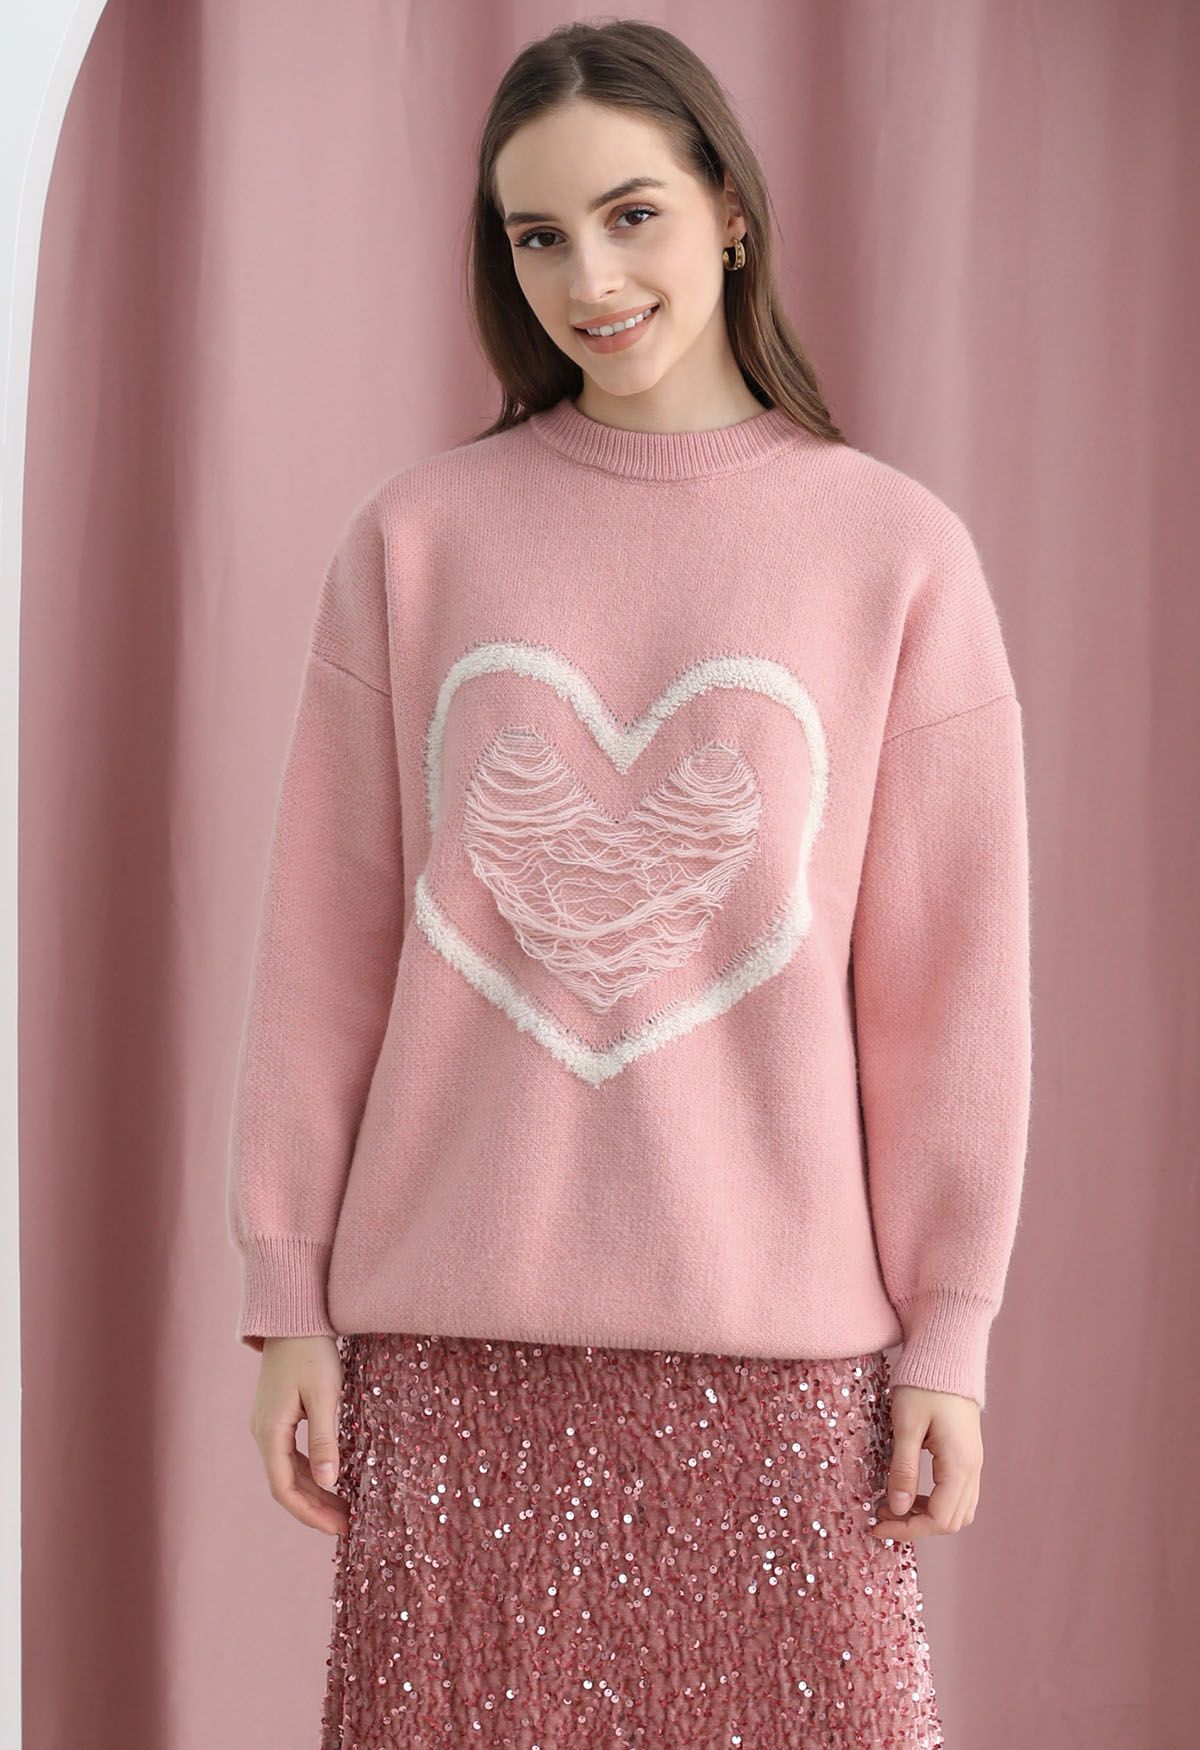 Ripped Heart Snug Knit Sweater in Pink